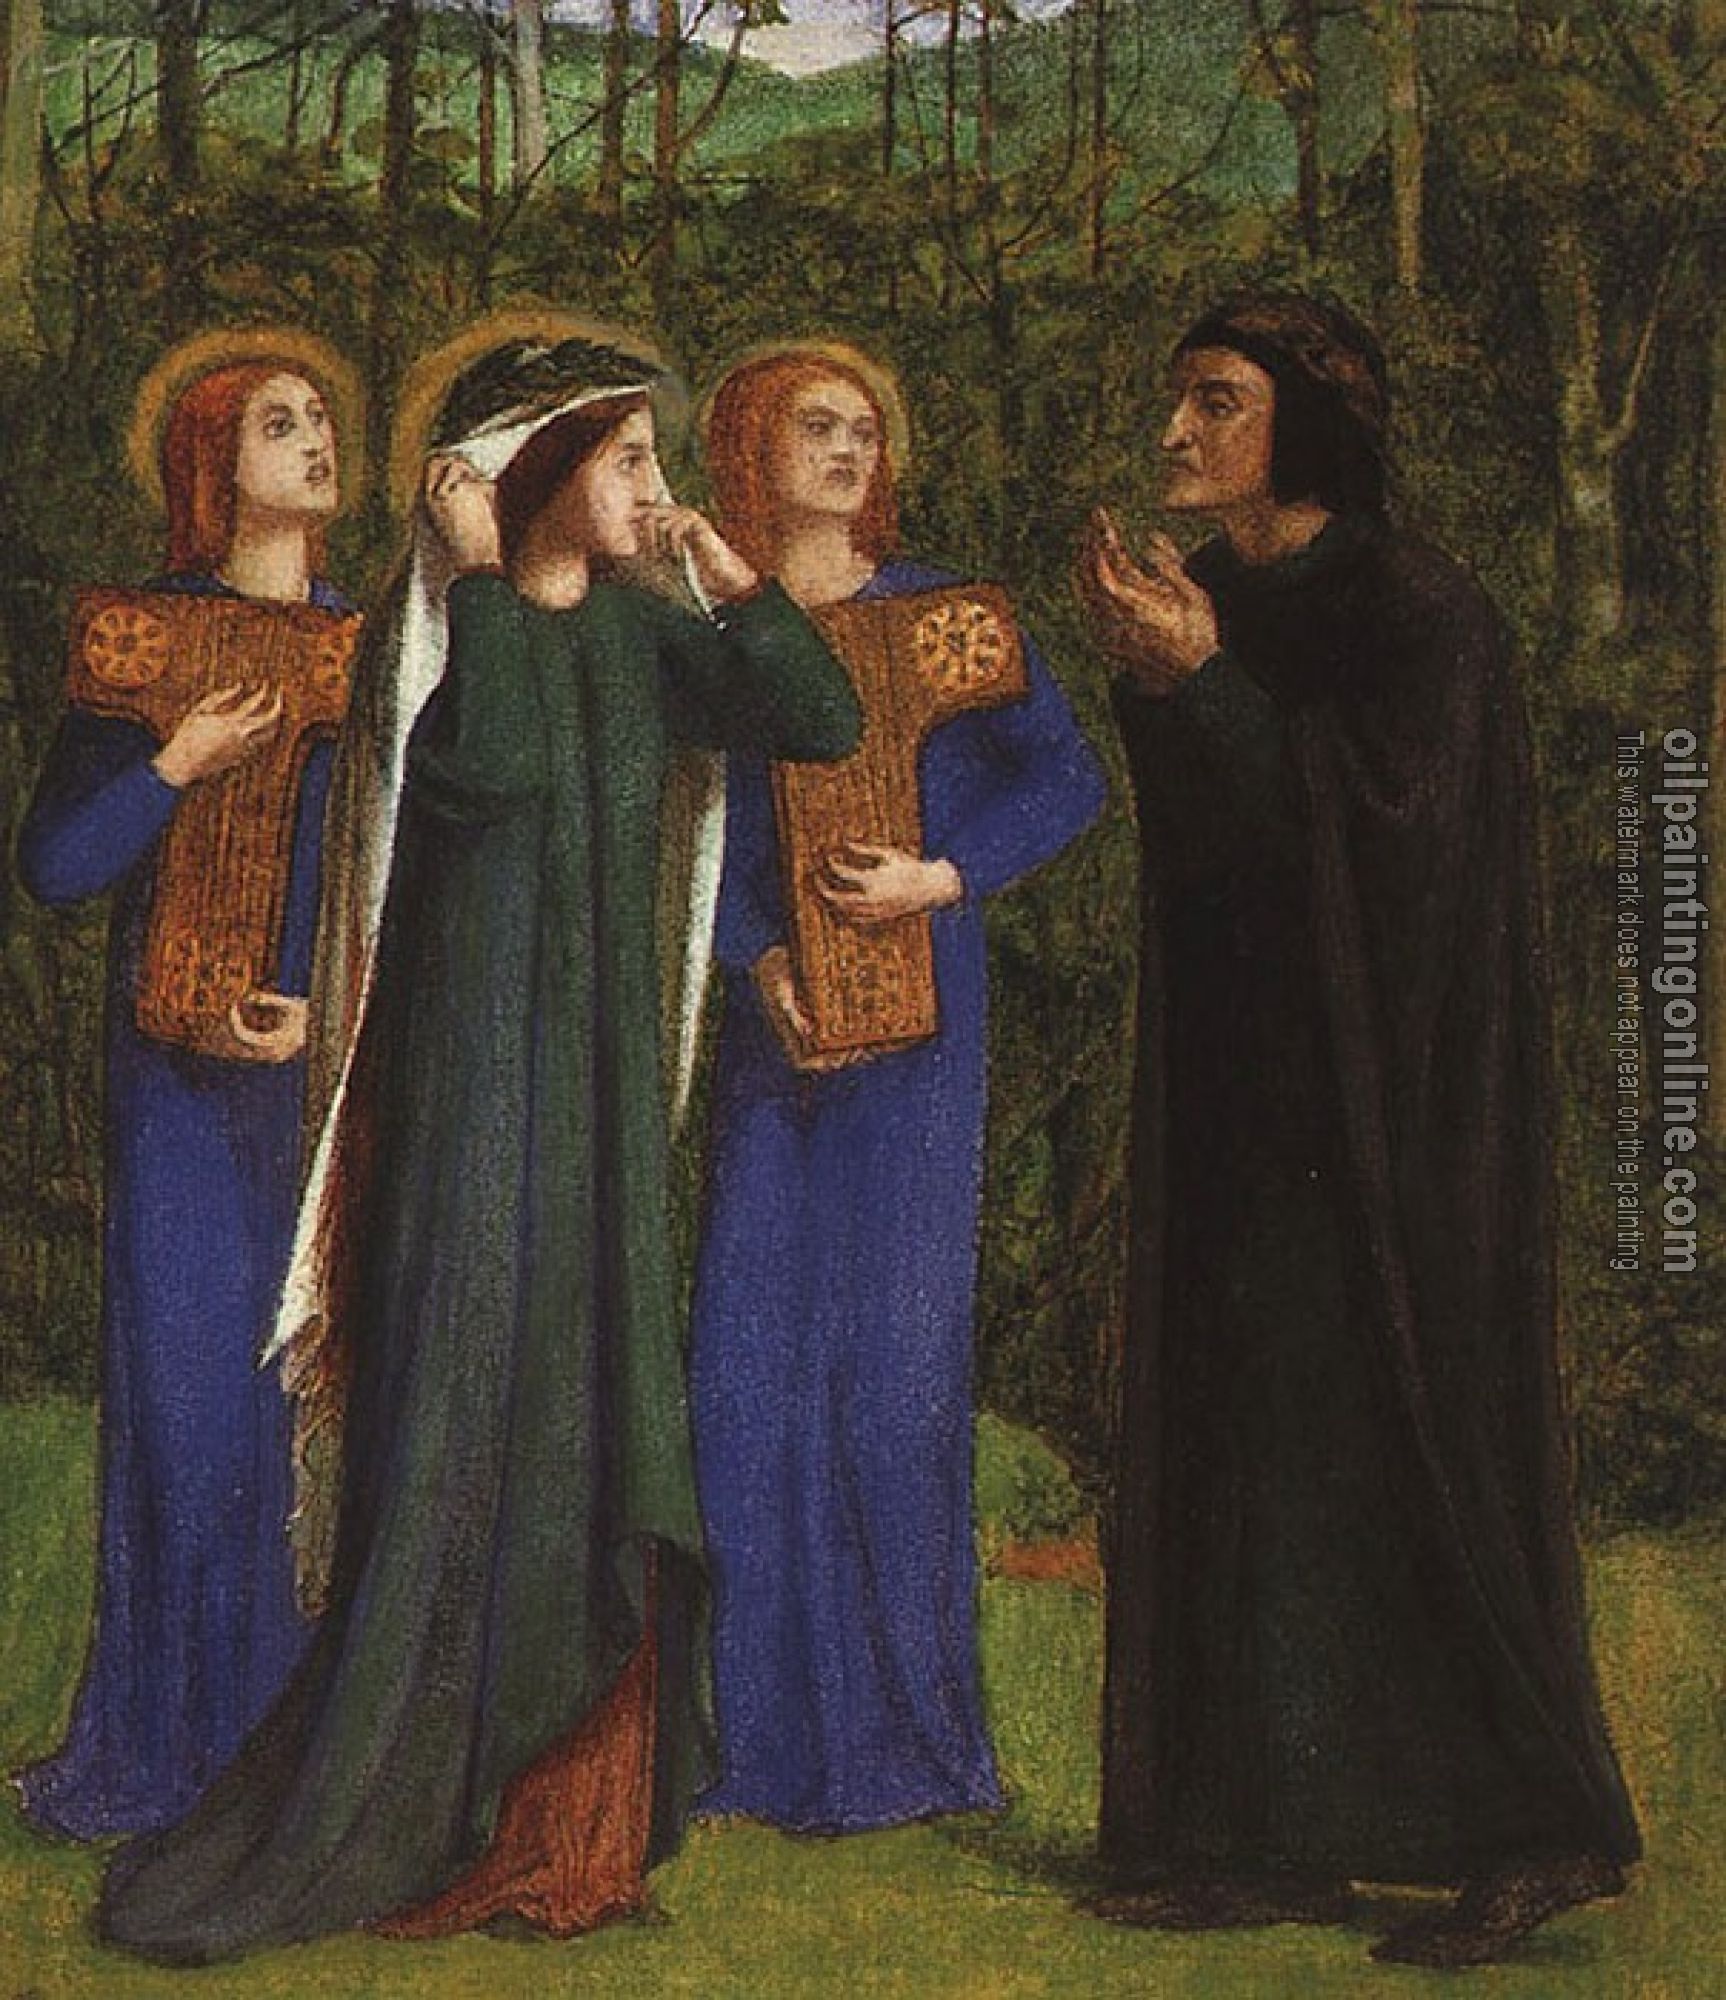 Rossetti, Dante Gabriel - The Meeting of Dante and Beatrice in Paradise